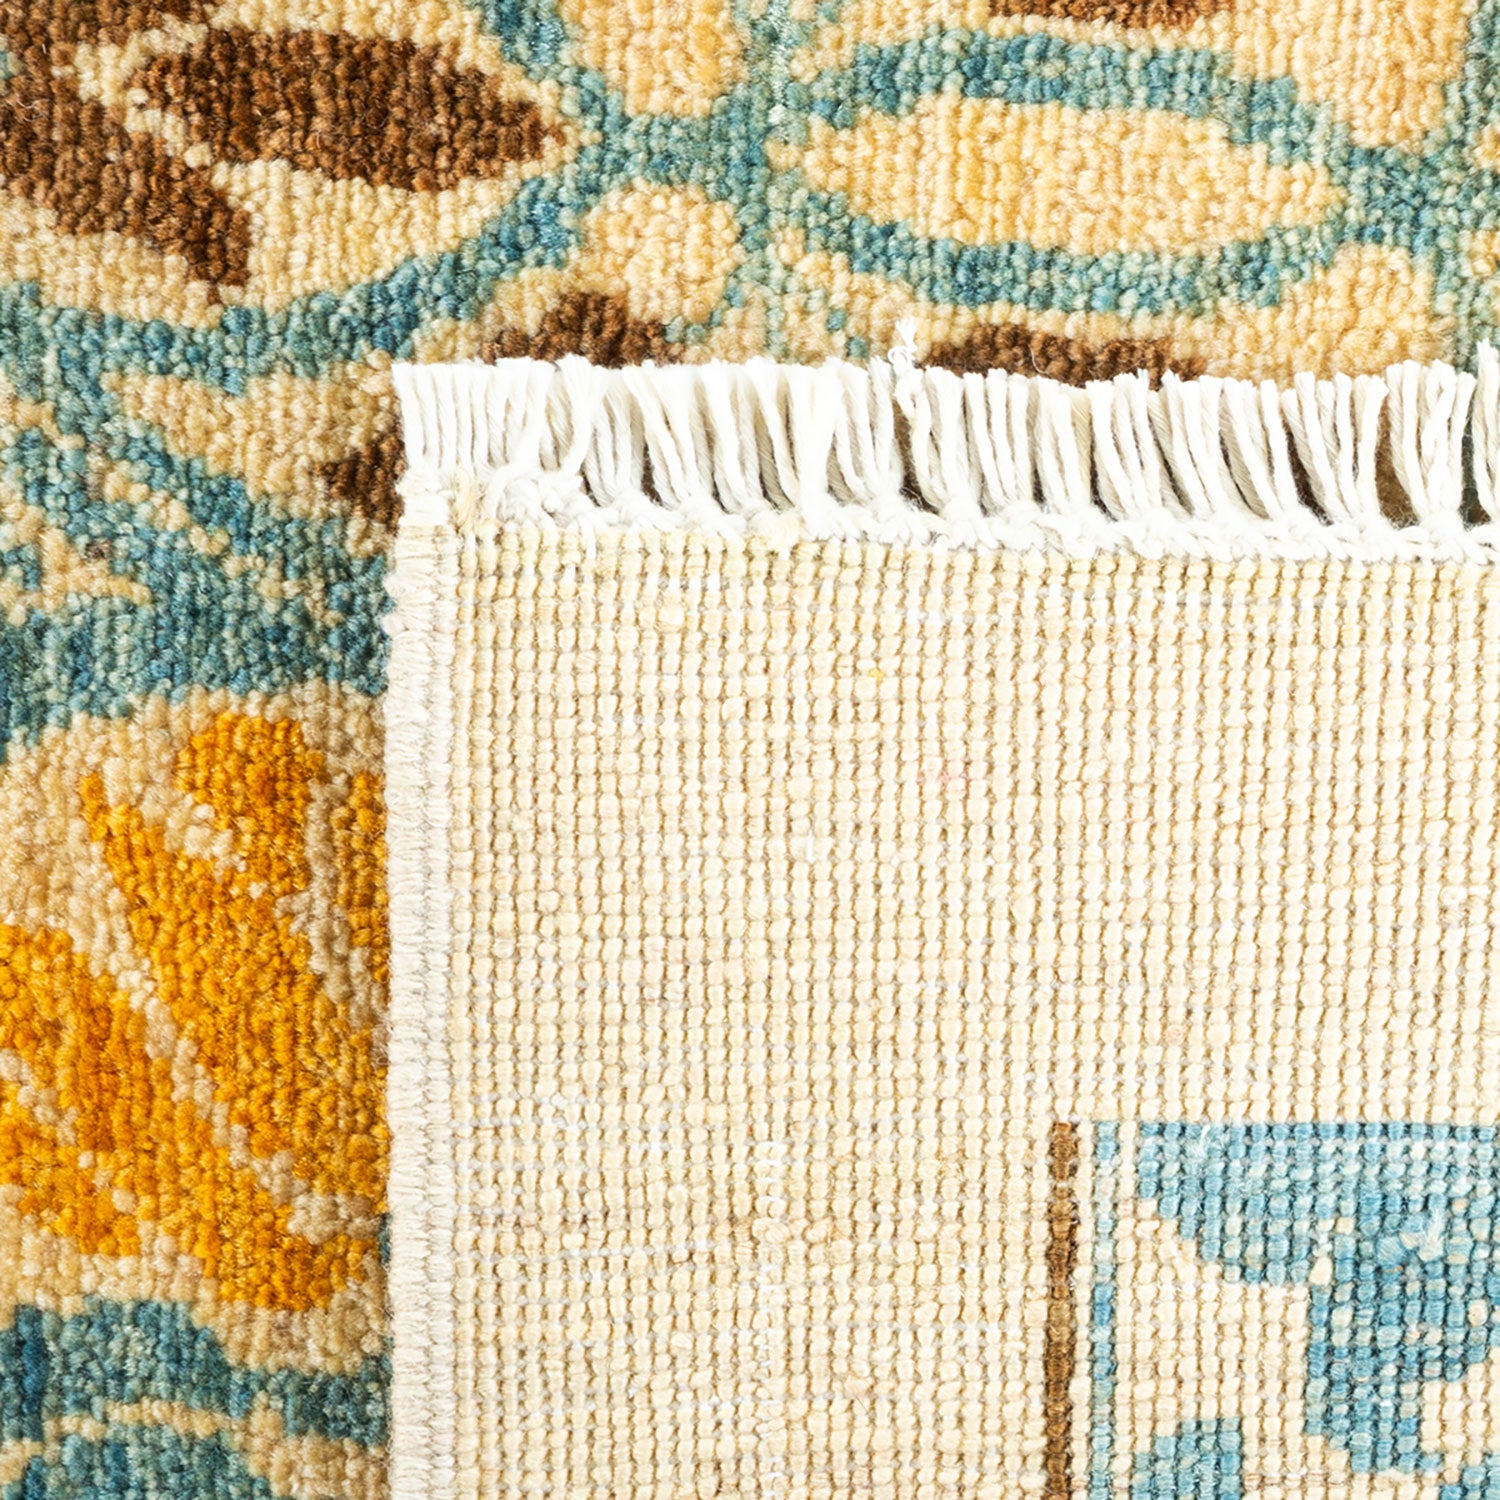 Close-up view of a ornate woven rug with fringe detail.